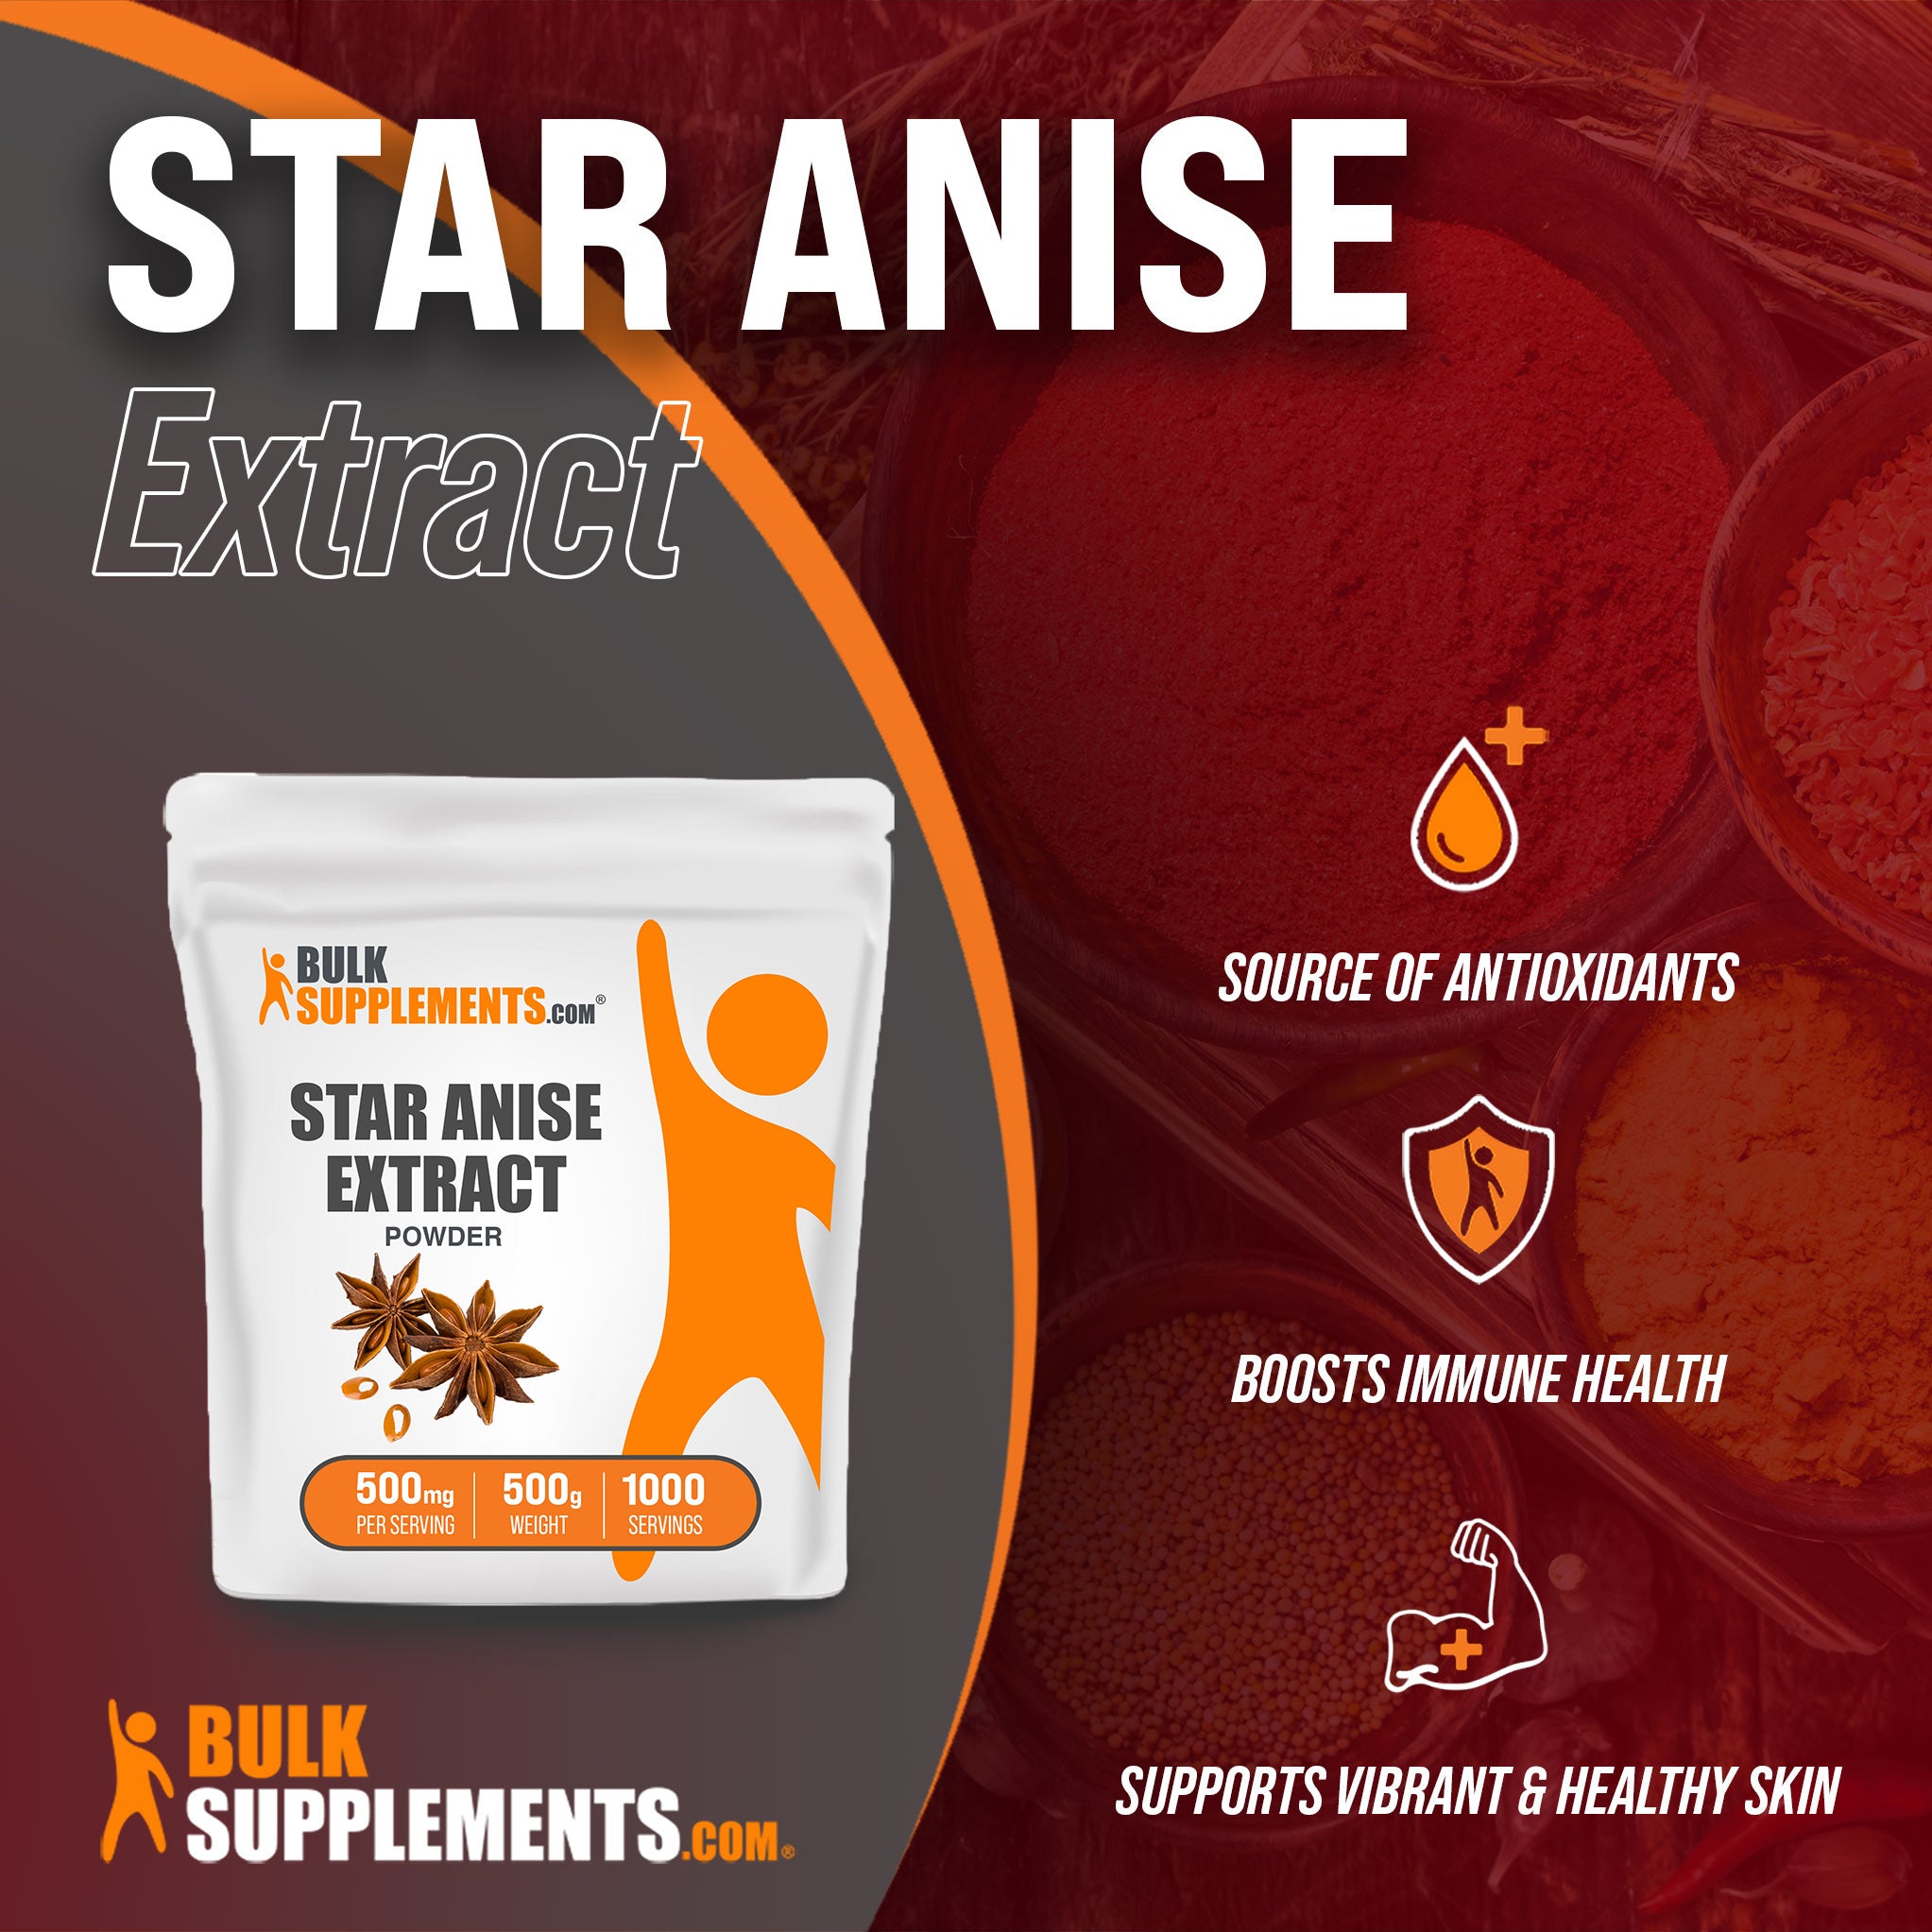 Benefits of Star Anise Extract: source of antioxidants, boosts immune health, supports vibrant and healthy skin